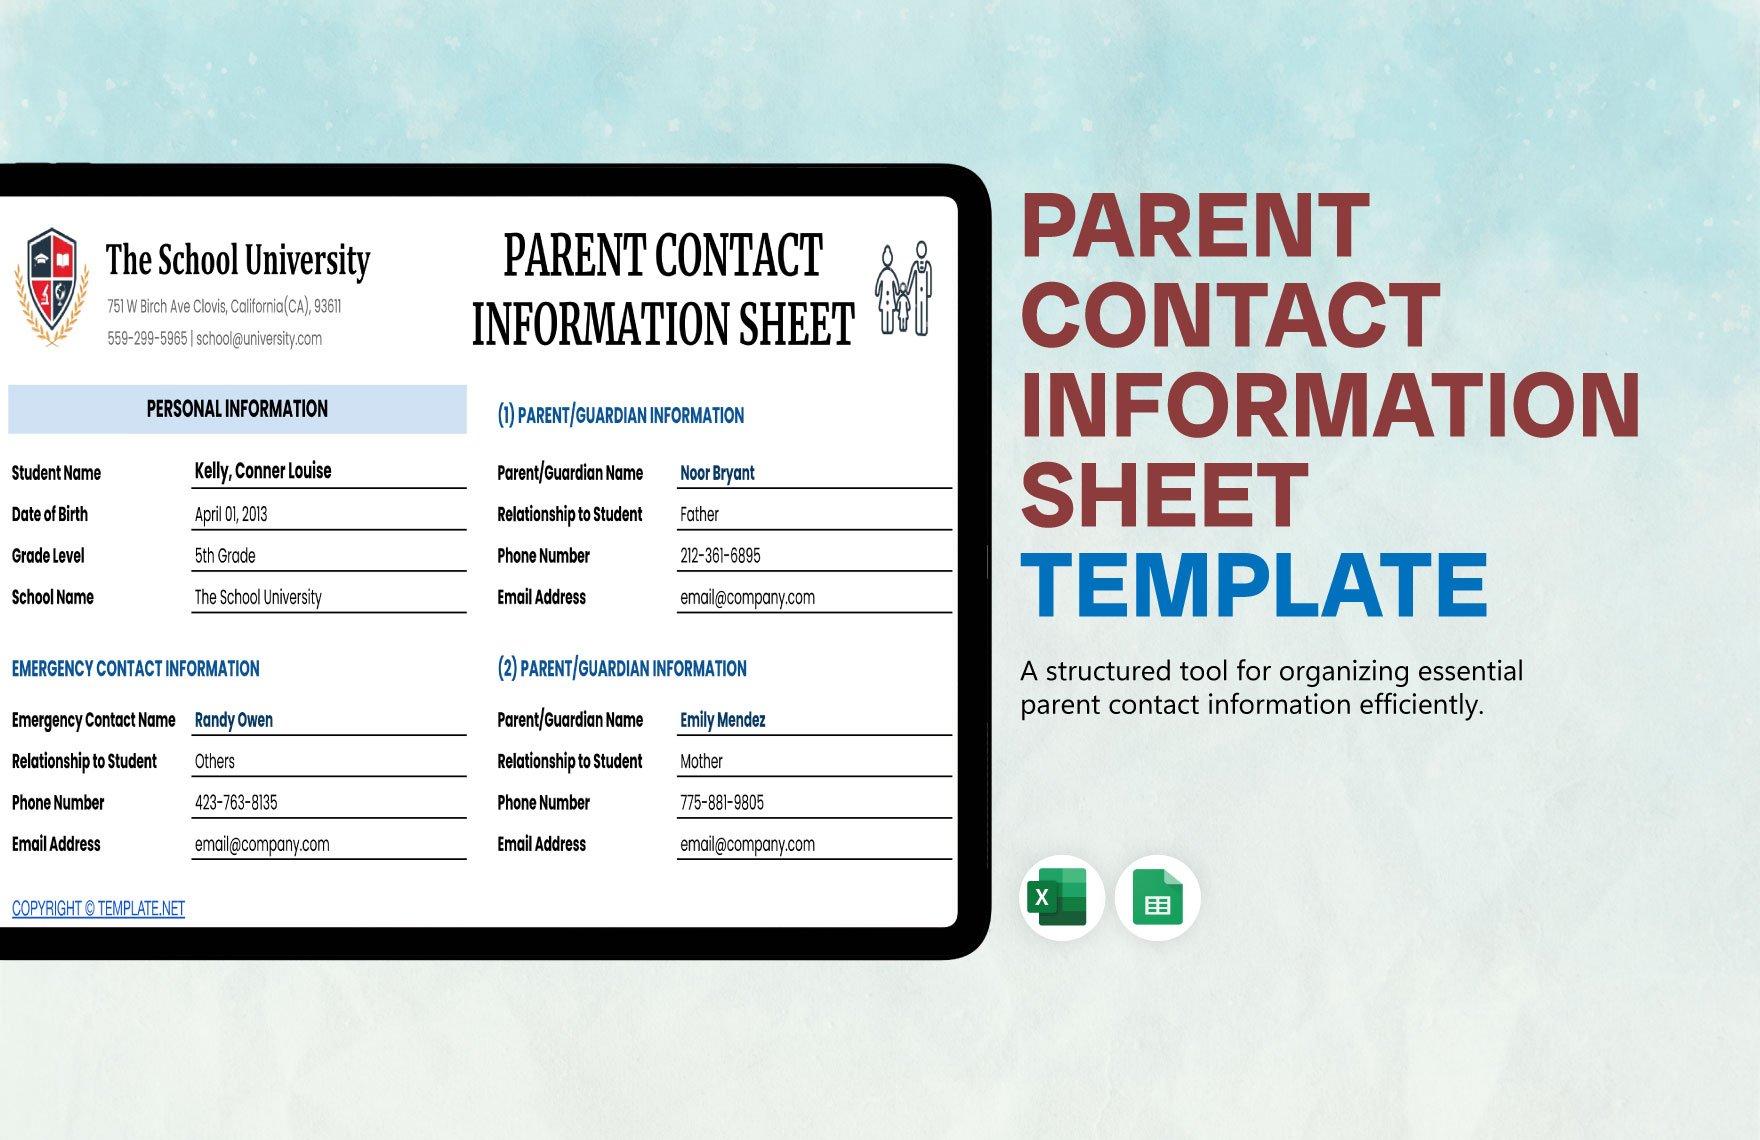 Parent Contact Information  Sheet Template in Excel, Google Sheets